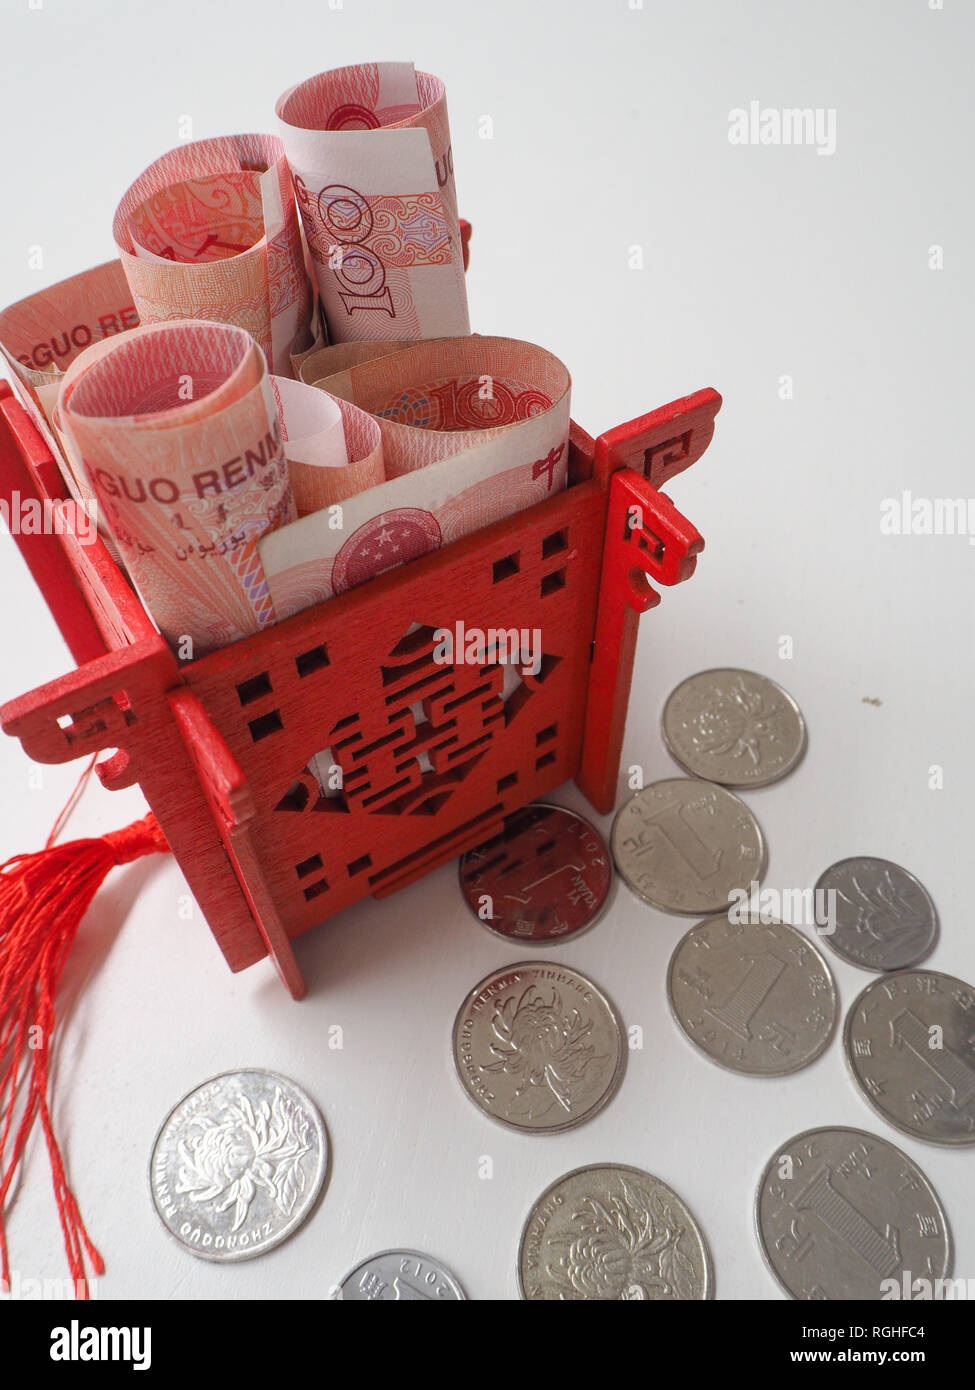 Miniature Chinese pavilion in bright red filled with Chinese 100 renminbi banknotes and surrounded by 1 yuan coins Stock Photo